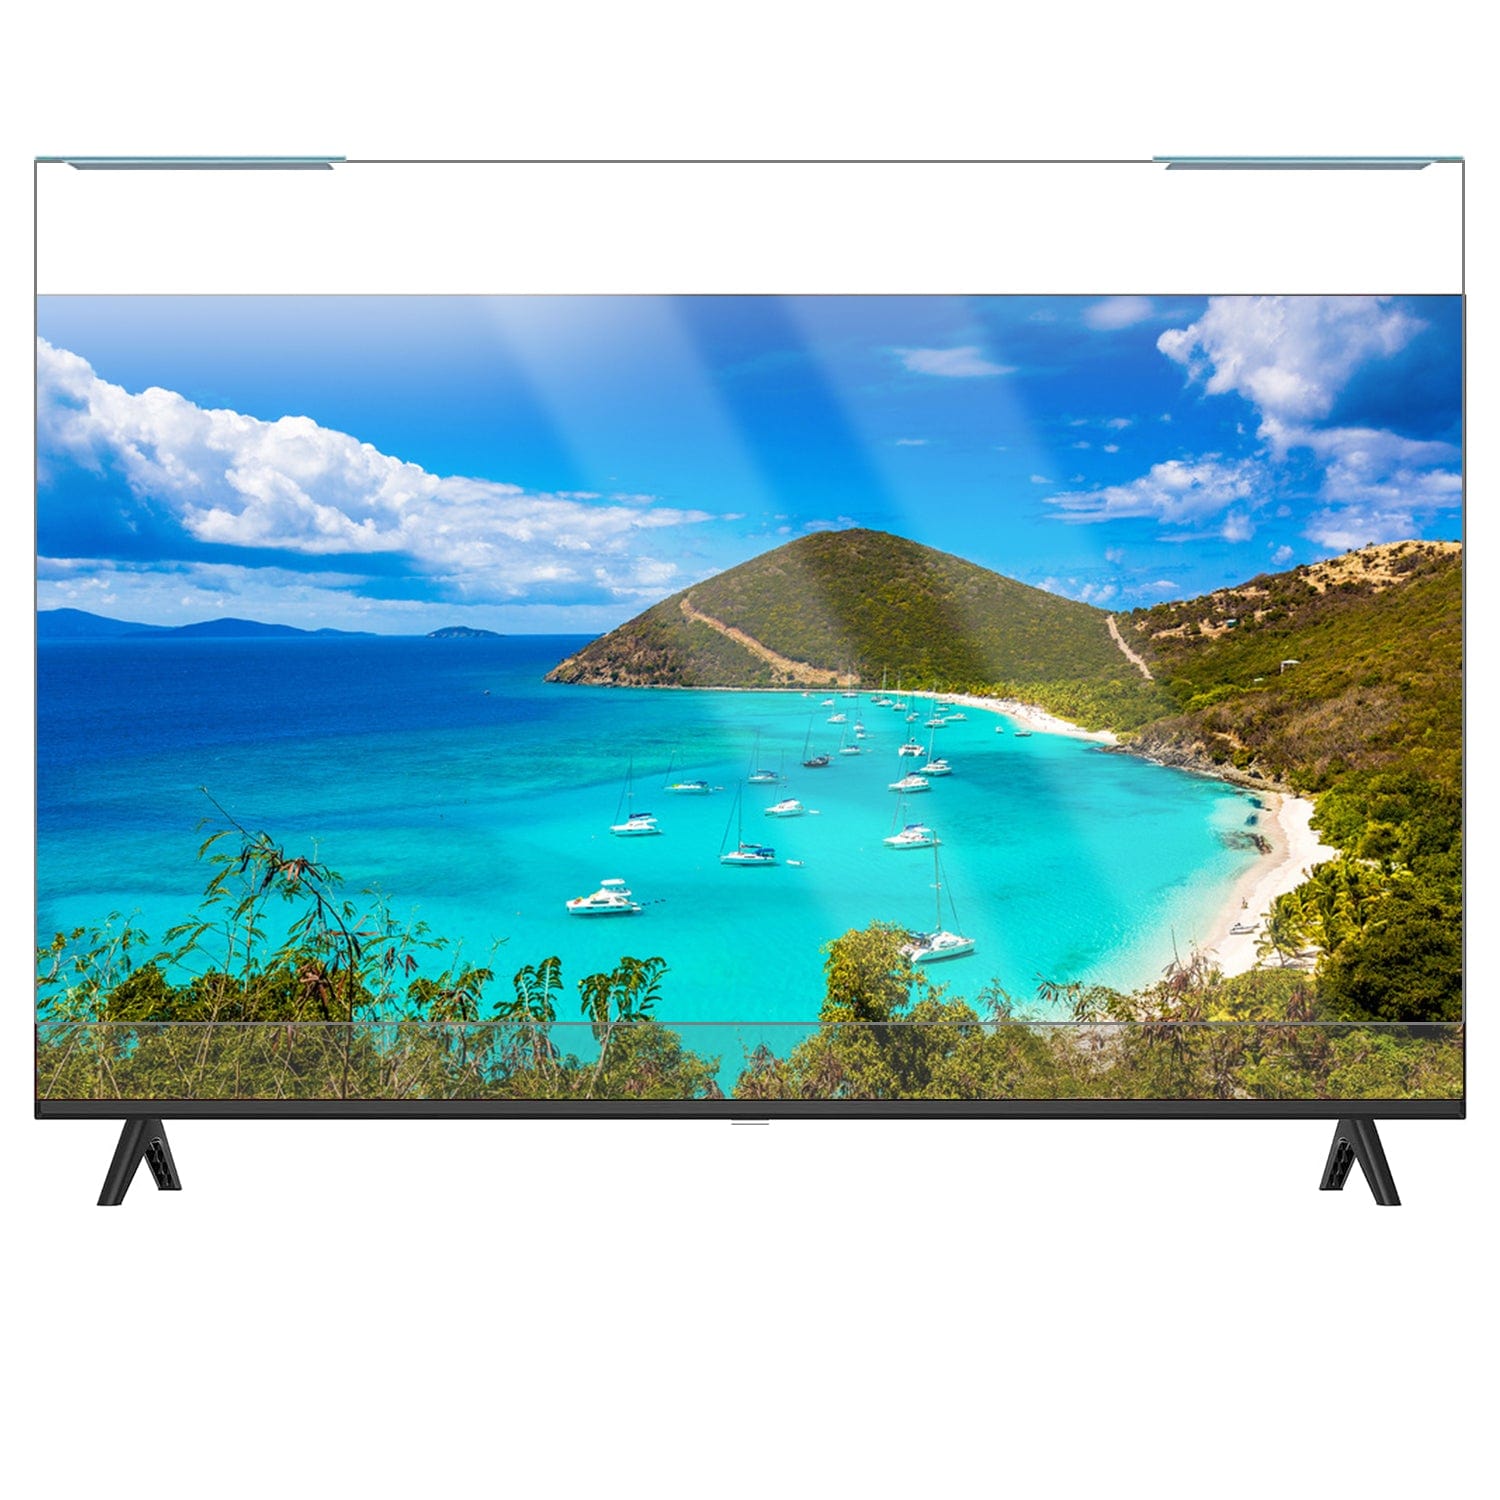 ZeroDamage Clear Screen Protector for most 86" TVs